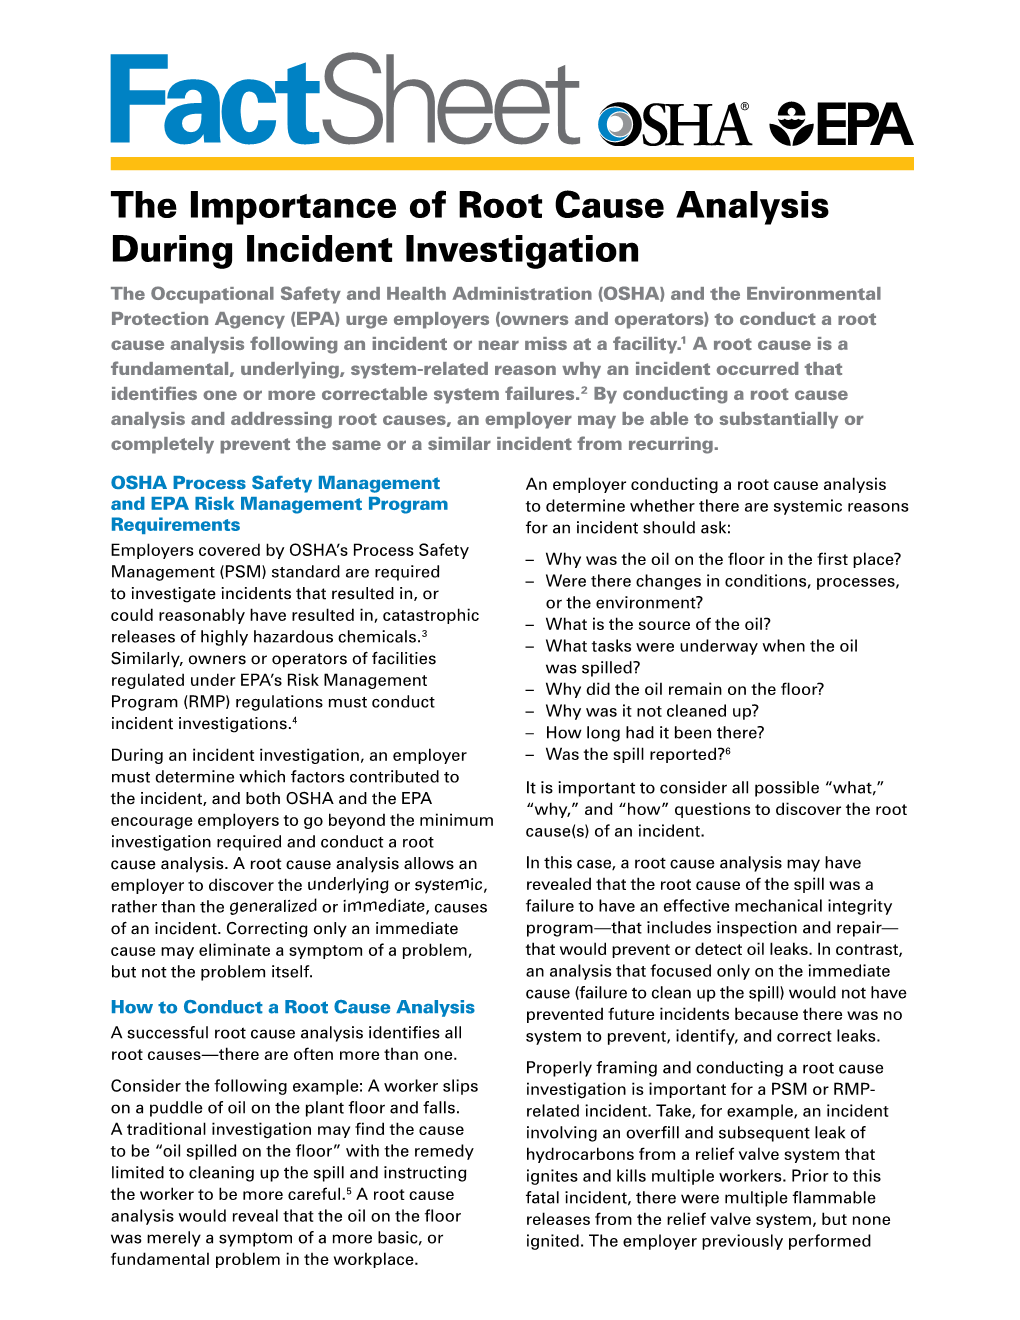 The Importance of Root Cause Analysis During Incident Investigation